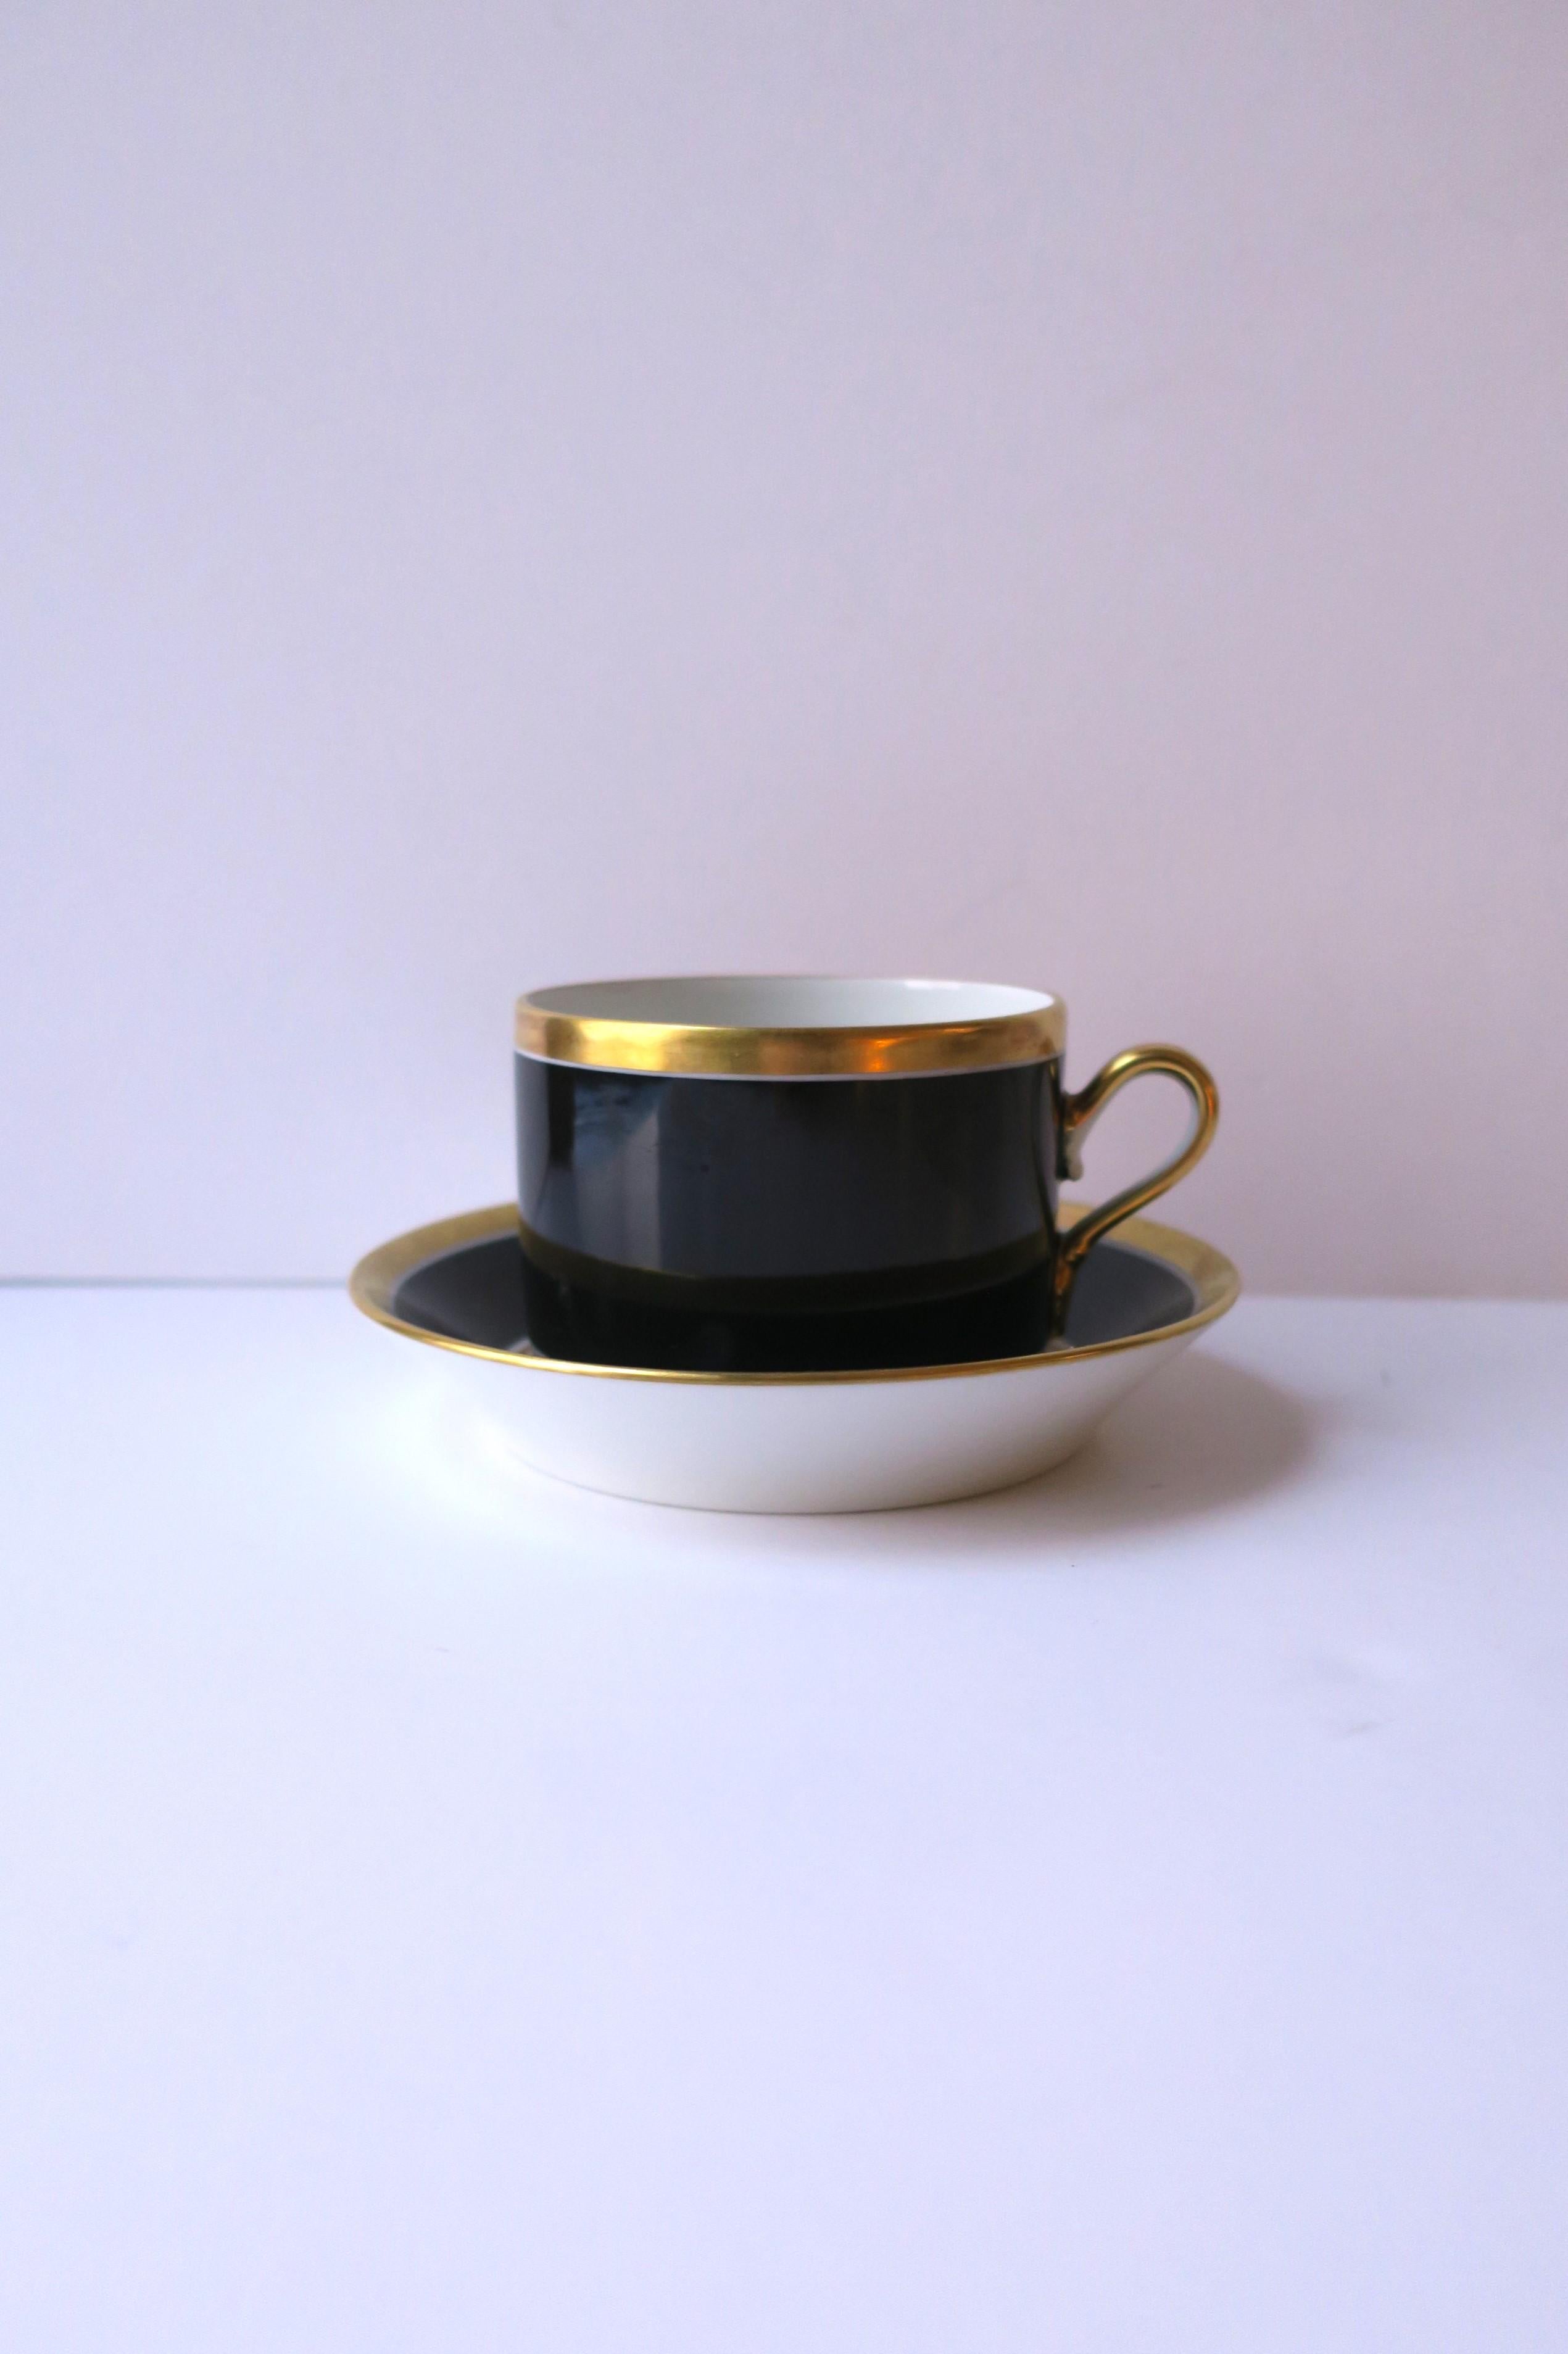 A beautiful and elegant Italian black and gold porcelain coffee or tea cup and saucer by designer Richard Ginori, circa mid-20th century, 1960s, Italy. With maker's mark on bottom of both as shown in last two images. Excellent condition as shown in